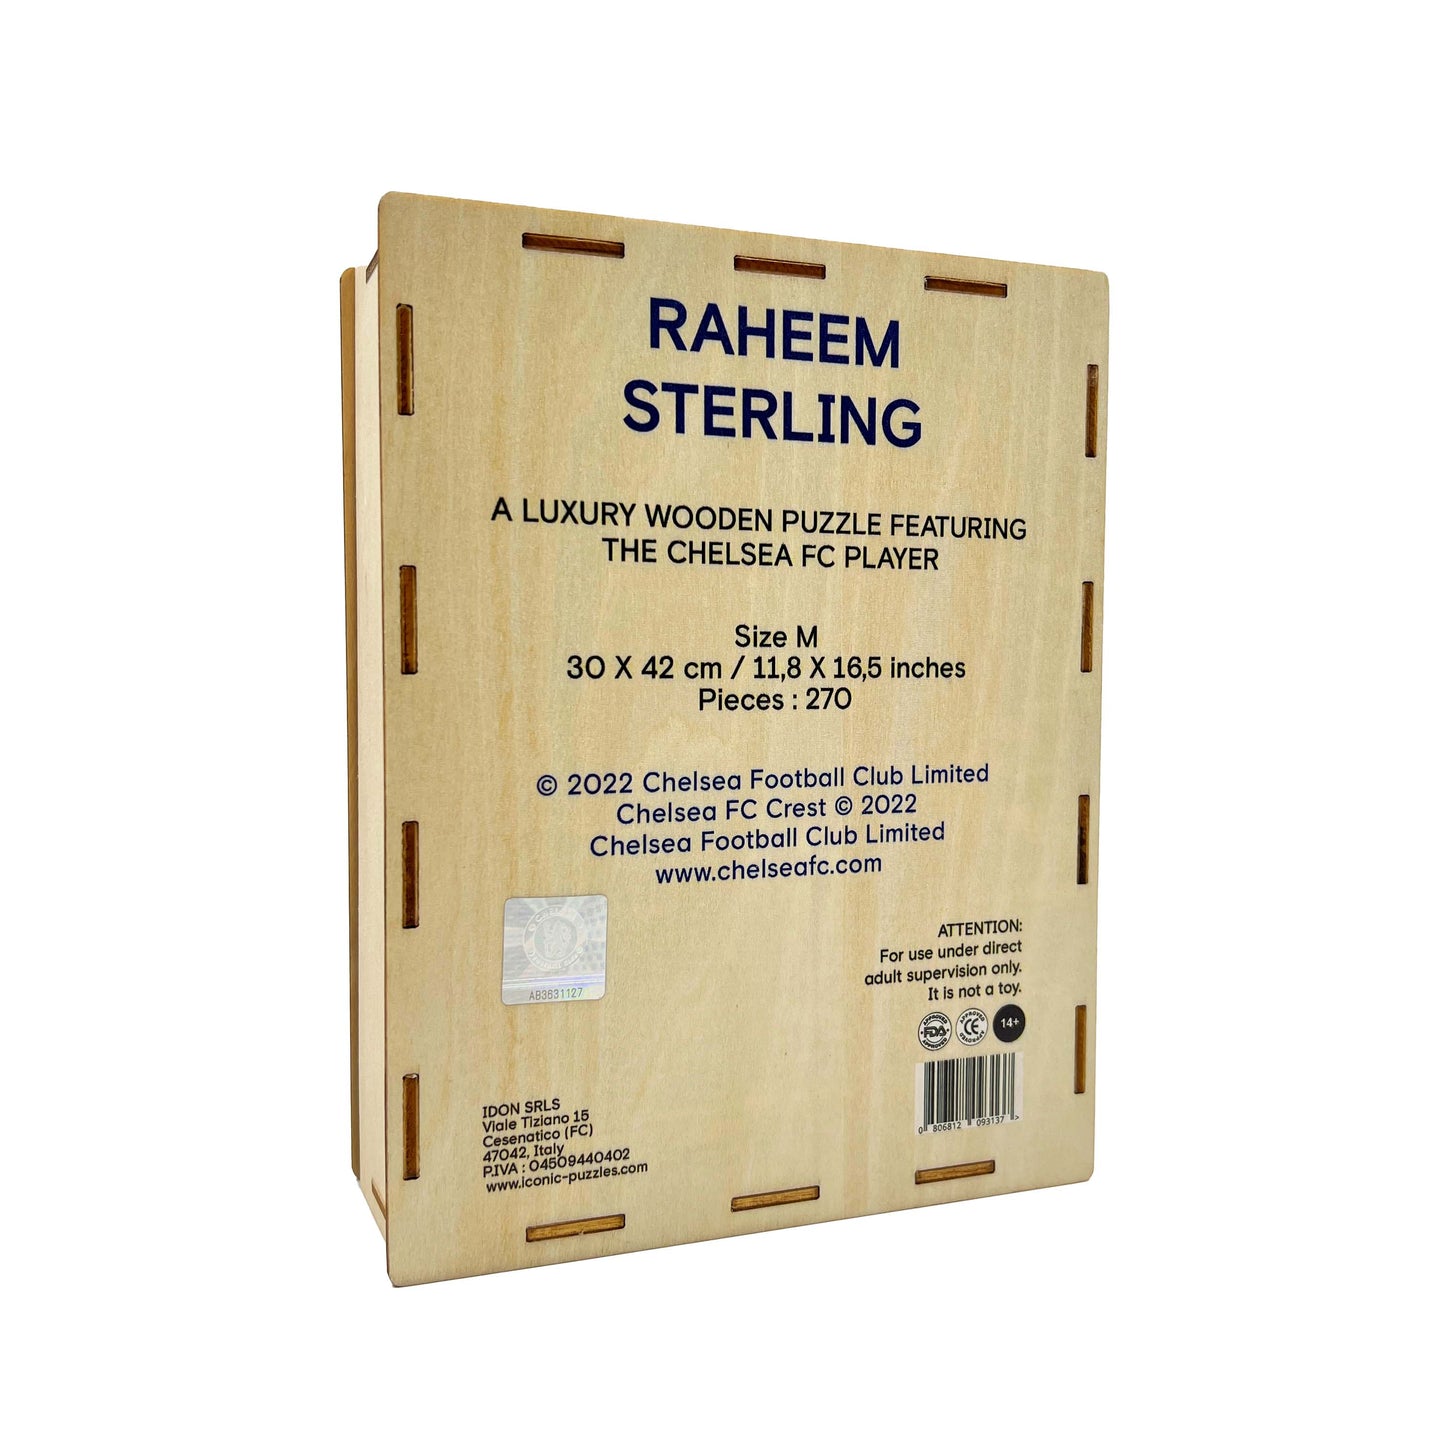 Raheem Sterling - Wooden Puzzle